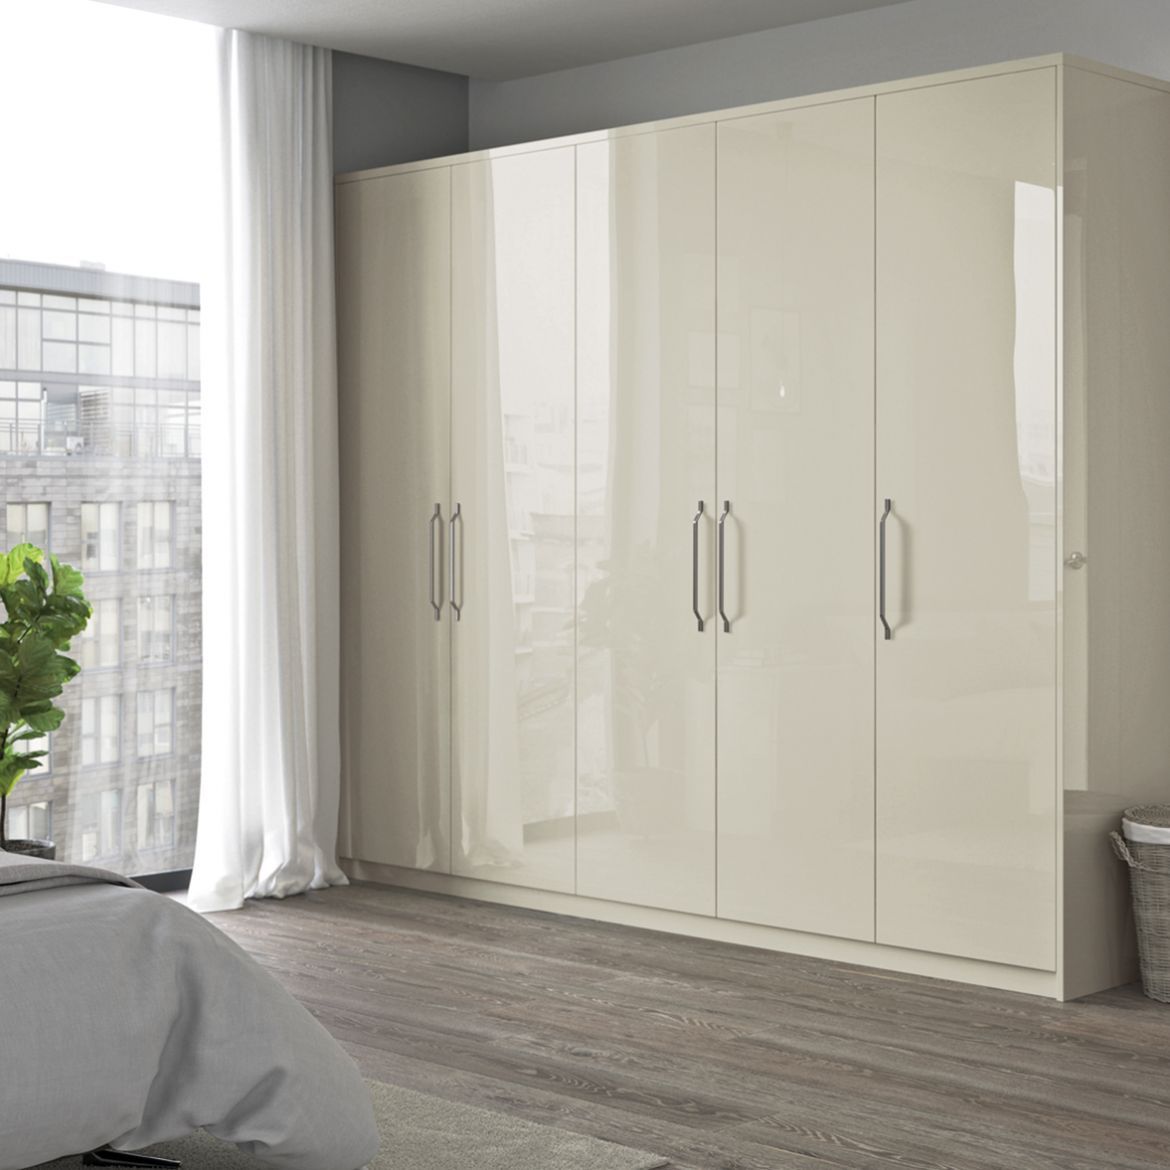 Reflections Wardrobe | Cash & Carry Kitchens Within Cream Gloss Wardrobes (View 3 of 15)